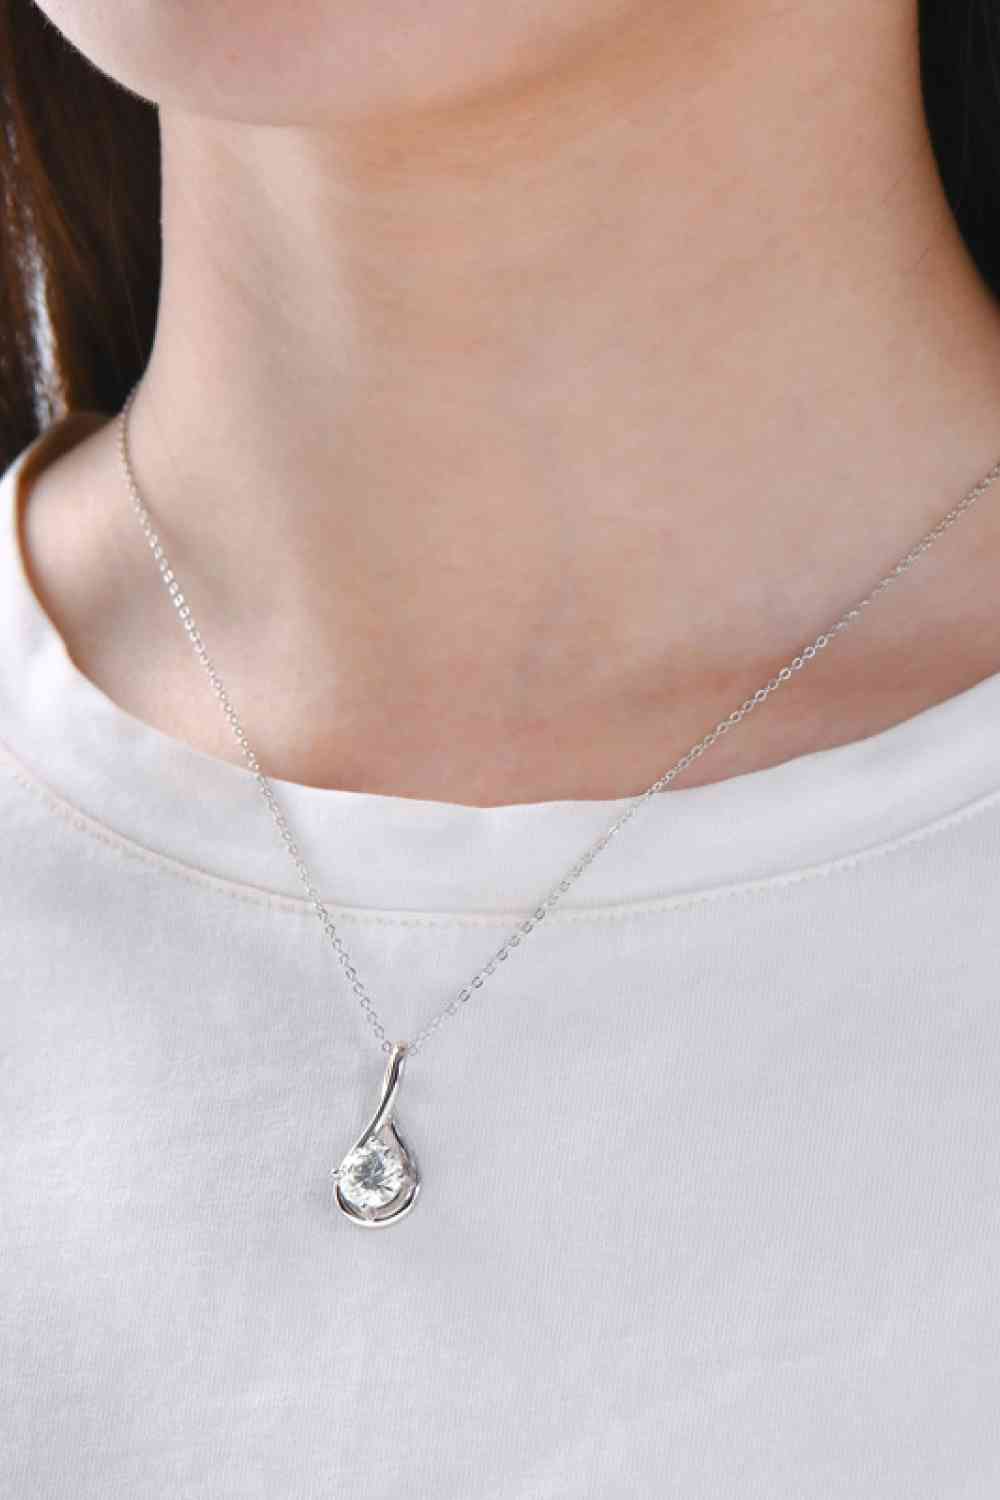 2 CARAT MOISSANITE PLATINUM PLATED STERLING SILVER NECKLACE